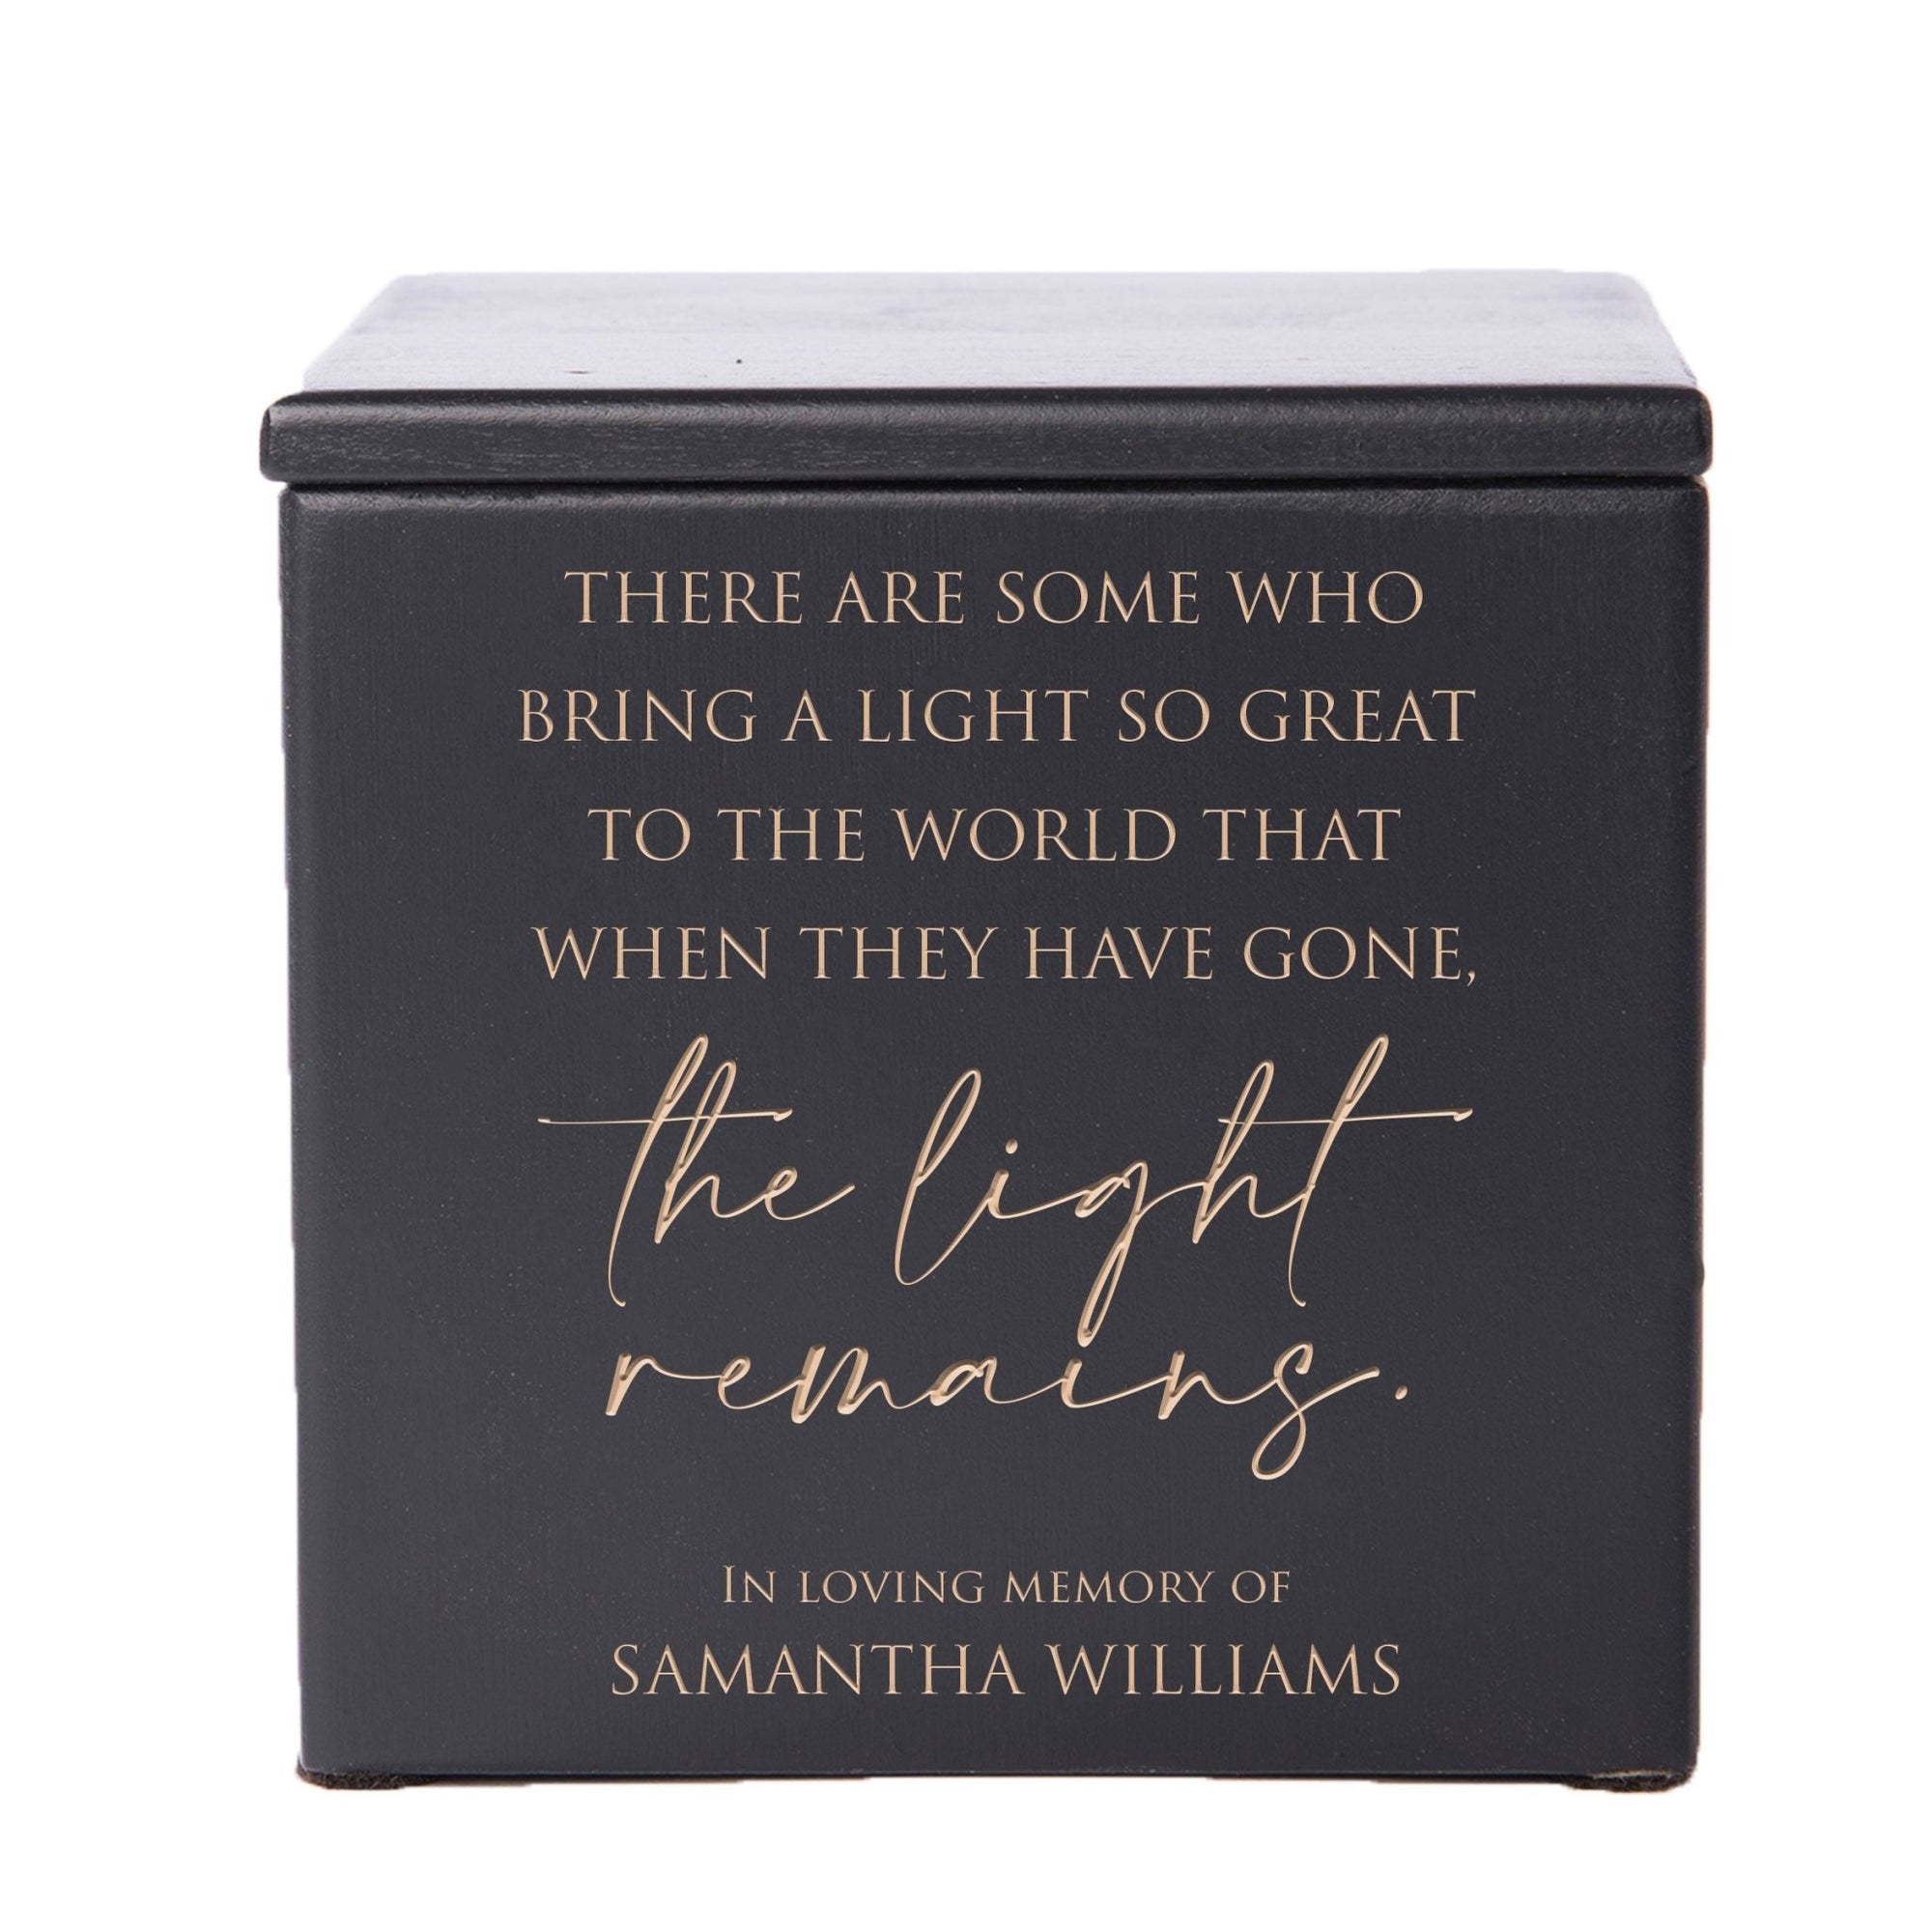 Custom-Engraved Memorial Wooden Keepsake Urn For Human Ashes - There Are Some Who Bring Light